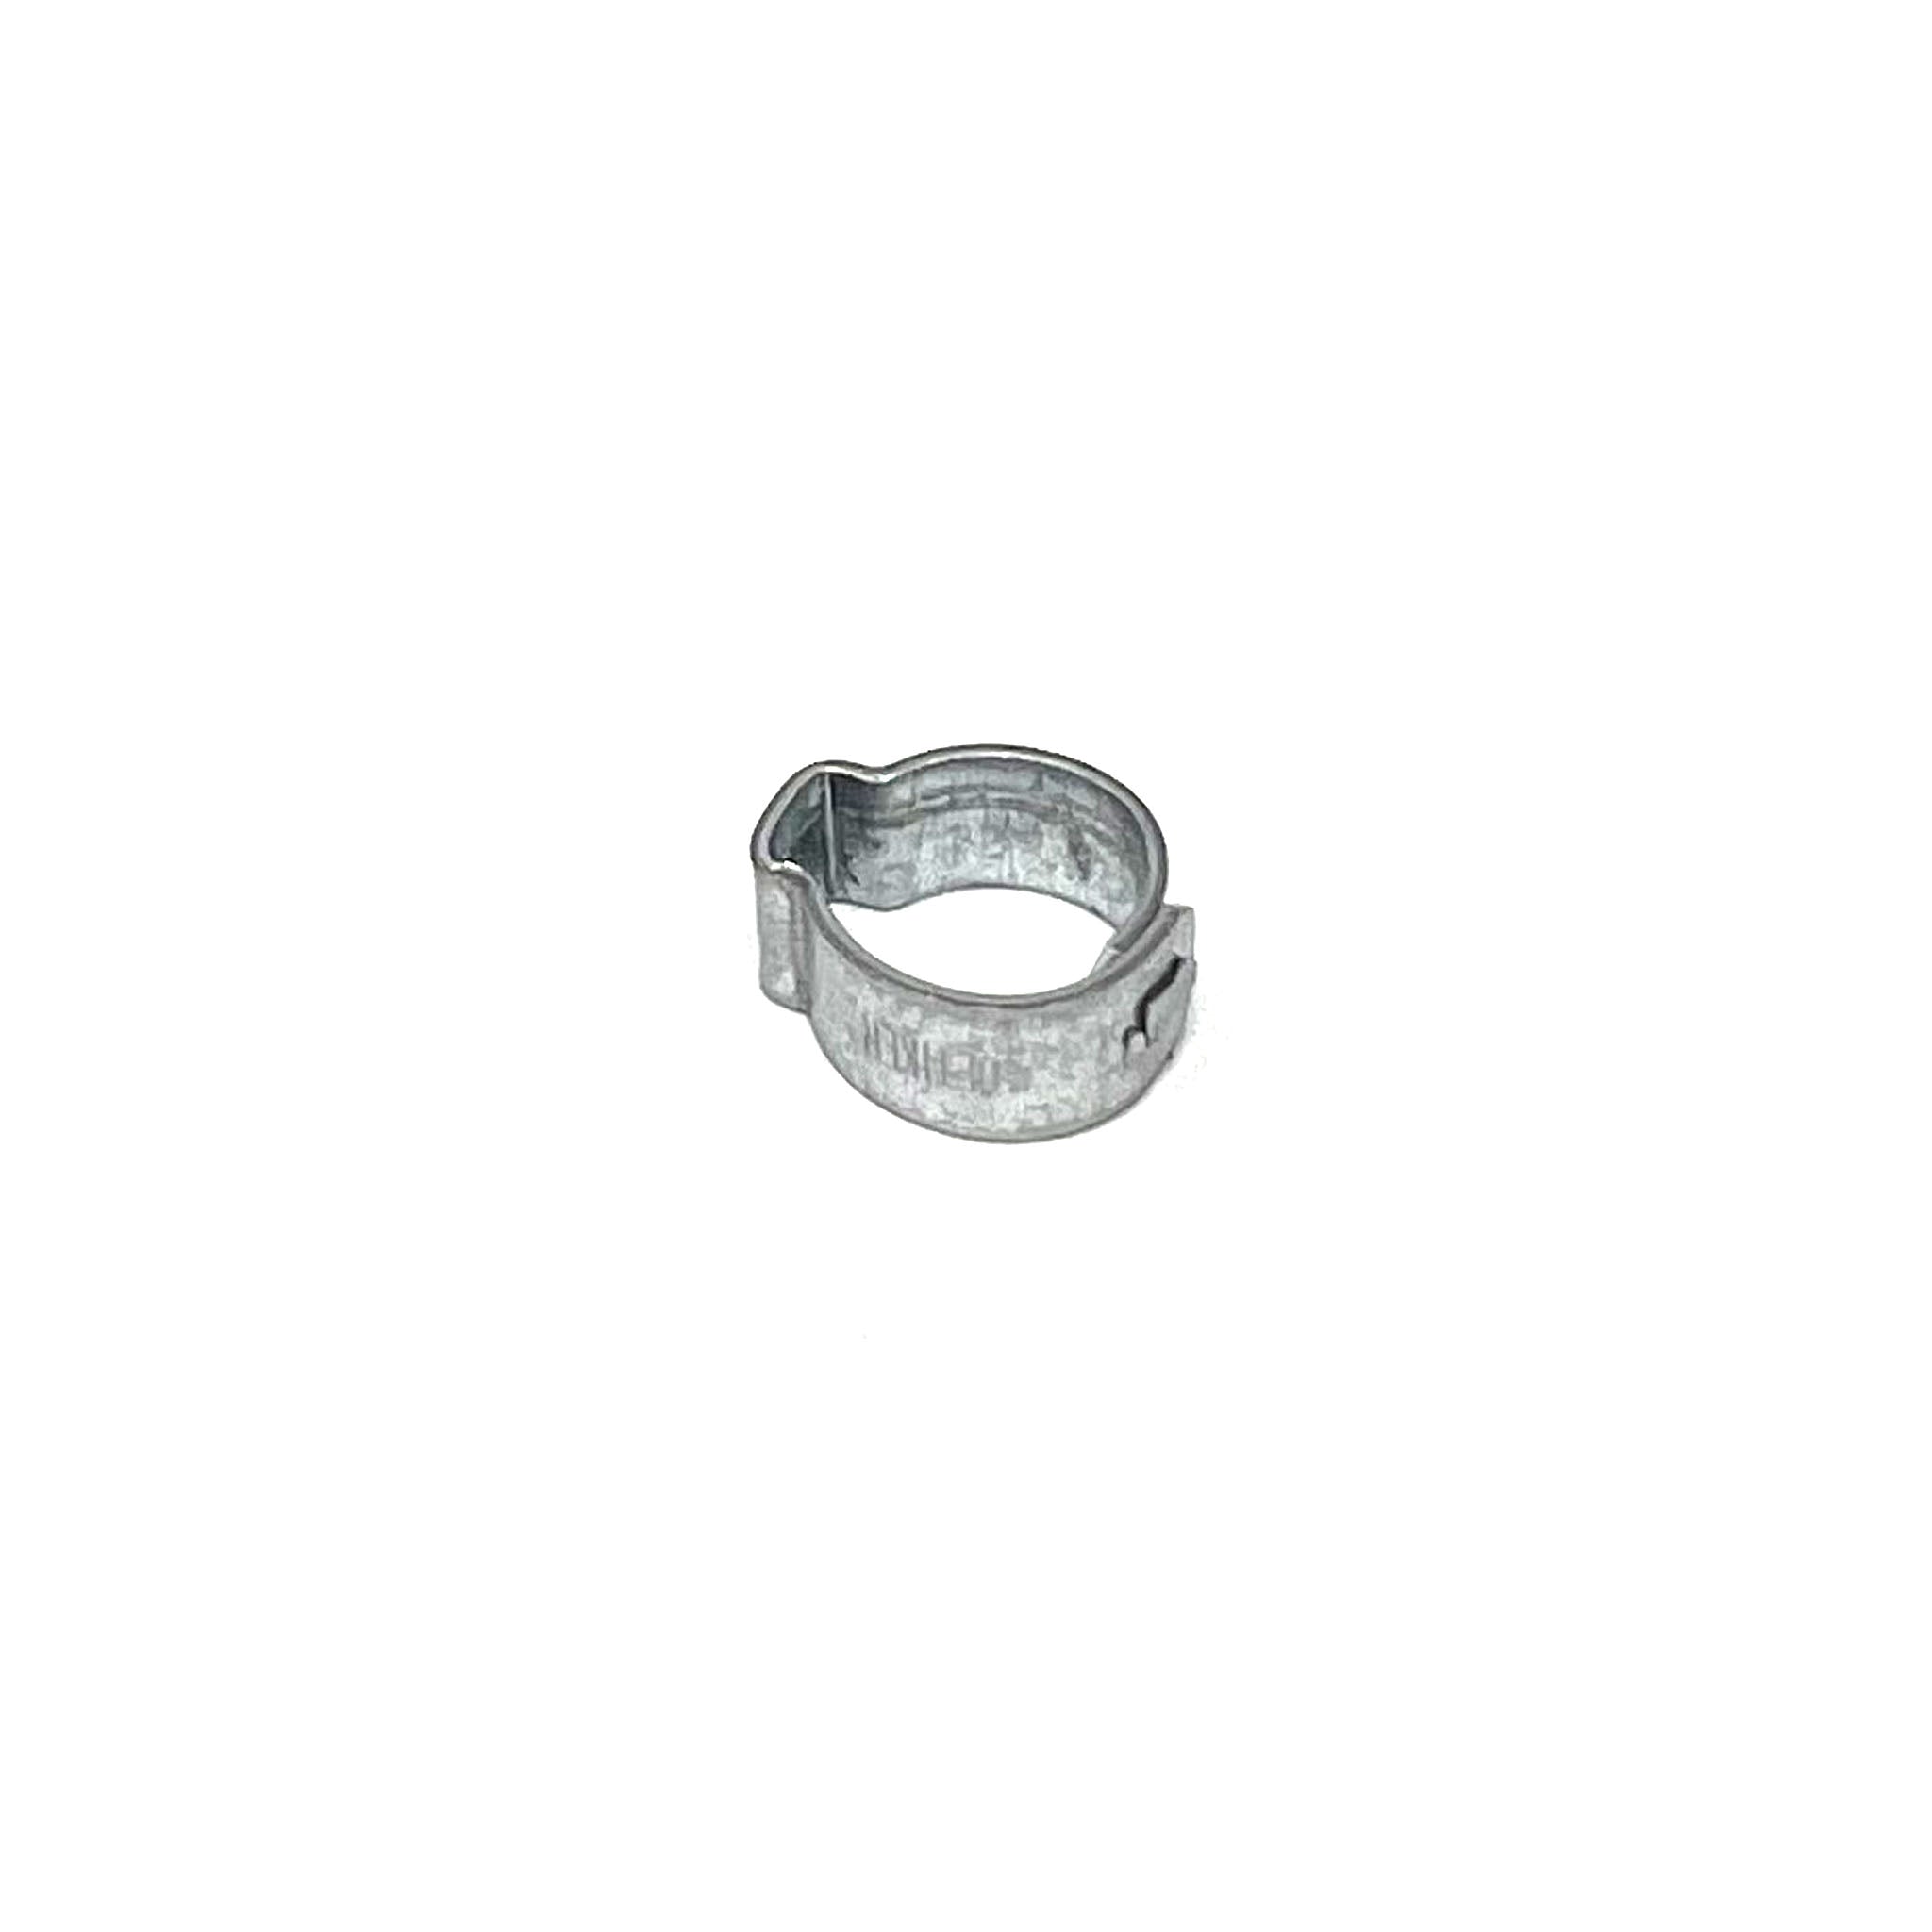 7/16" Pinch Hose Clamps (.381" - 7/16") 9.7-11.3MM